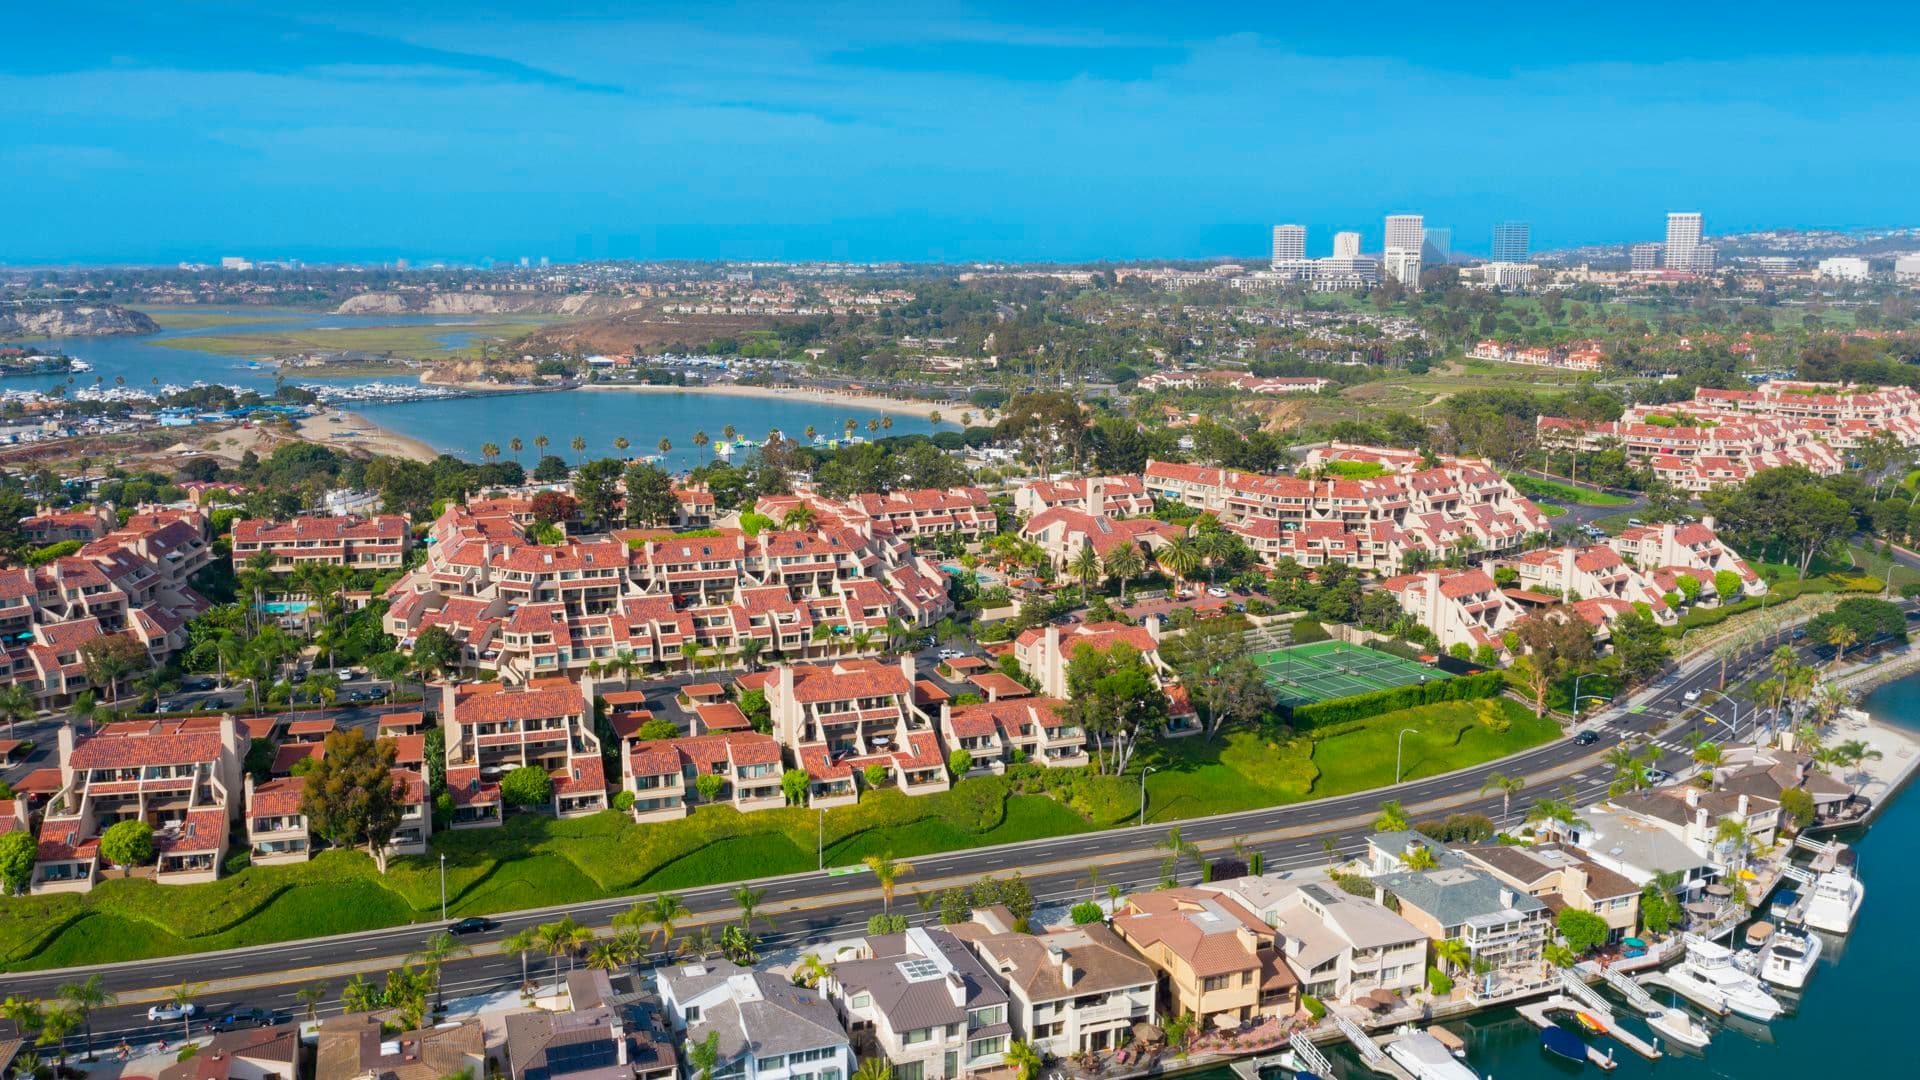 Drone view of Promontory Point Apartment Homes in Newport, CA.